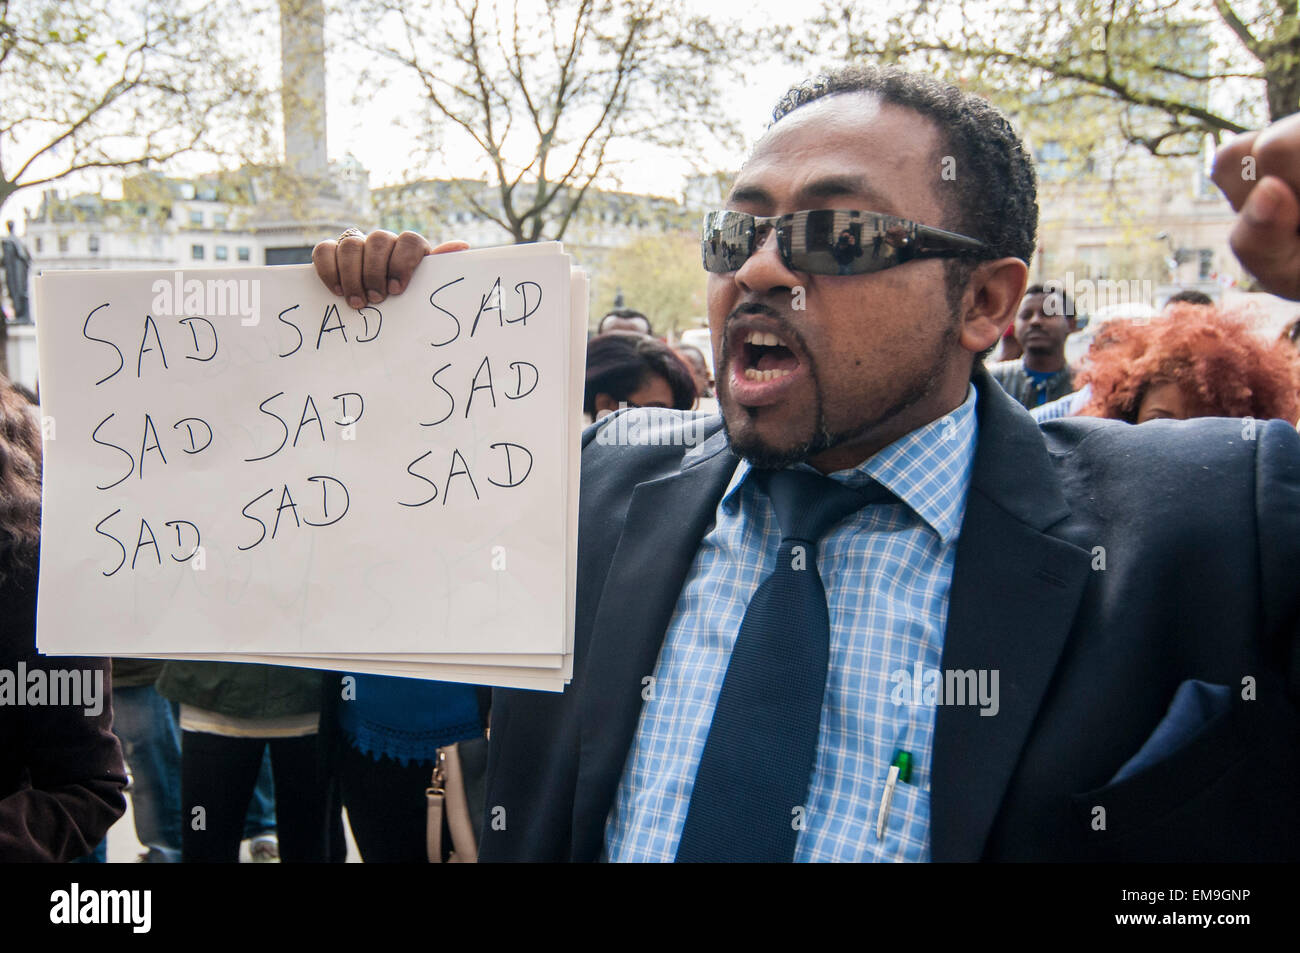 London, UK. 17 April 2015.  Ethiopians living in London gather outside the South African Embassy in Trafalgar Square to protest against the xenophobic violence taking place in South Africa.  According to the protestors, Zulu people have said that foreigners, including Ethiopians, should pack up and leave South Africa. Credit:  Stephen Chung / Alamy Live News Stock Photo